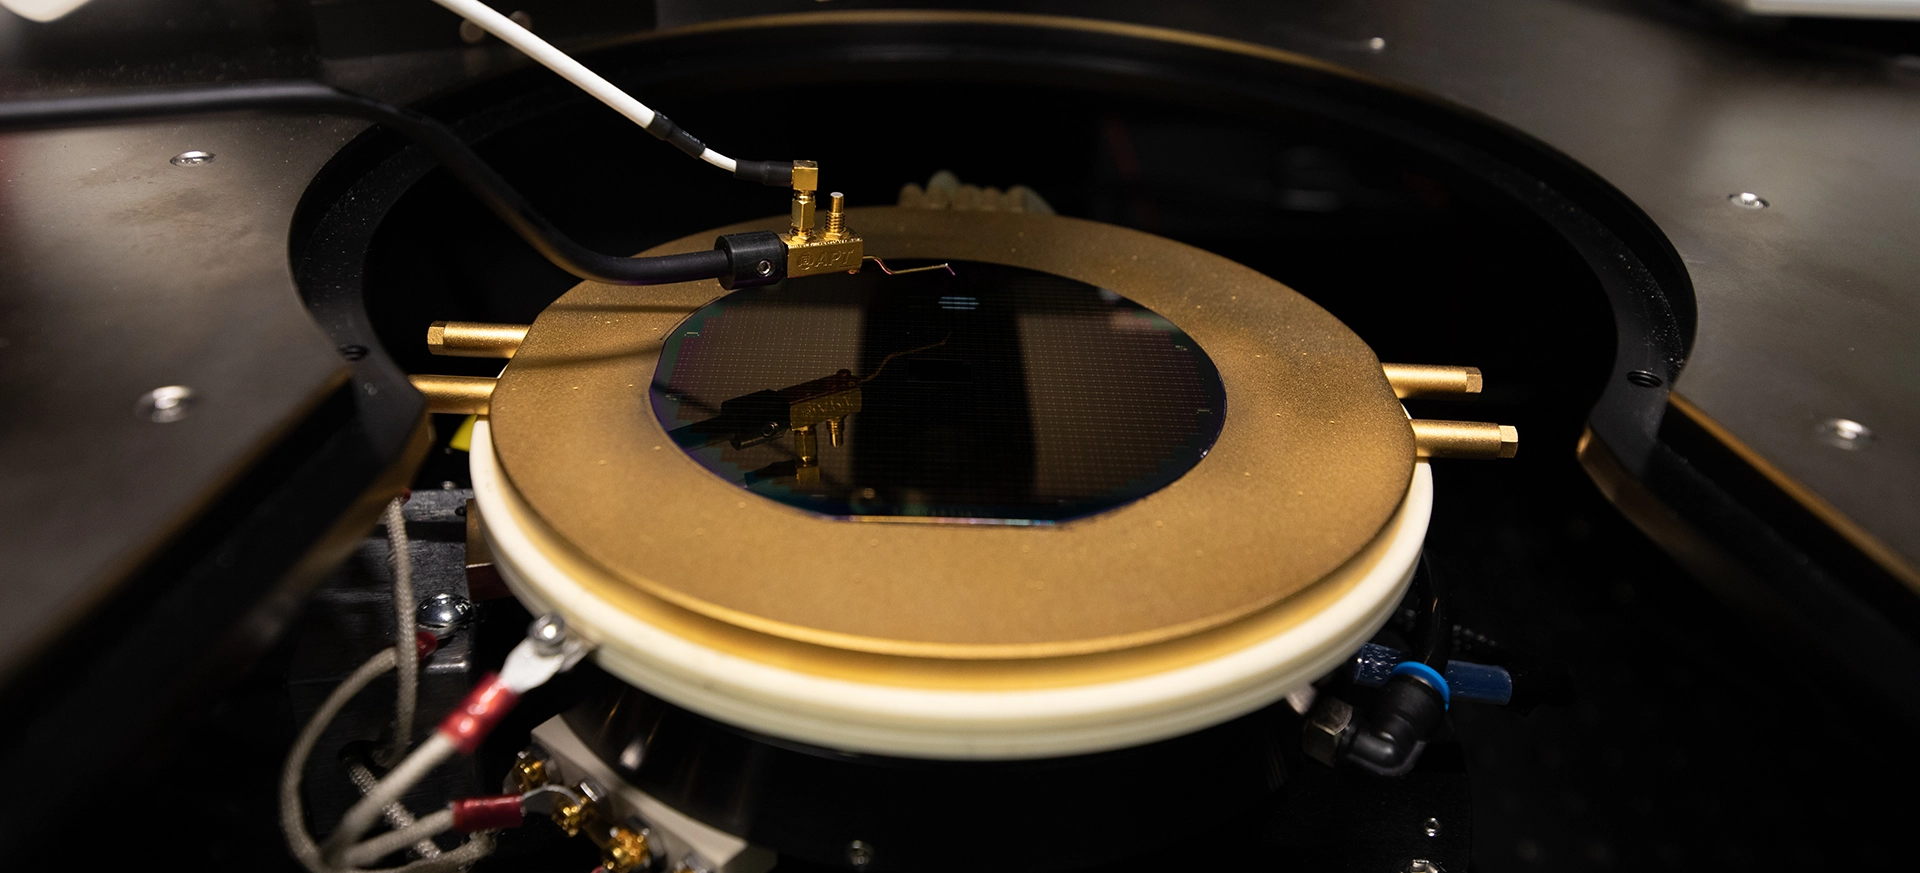 epitaxial wafer being made